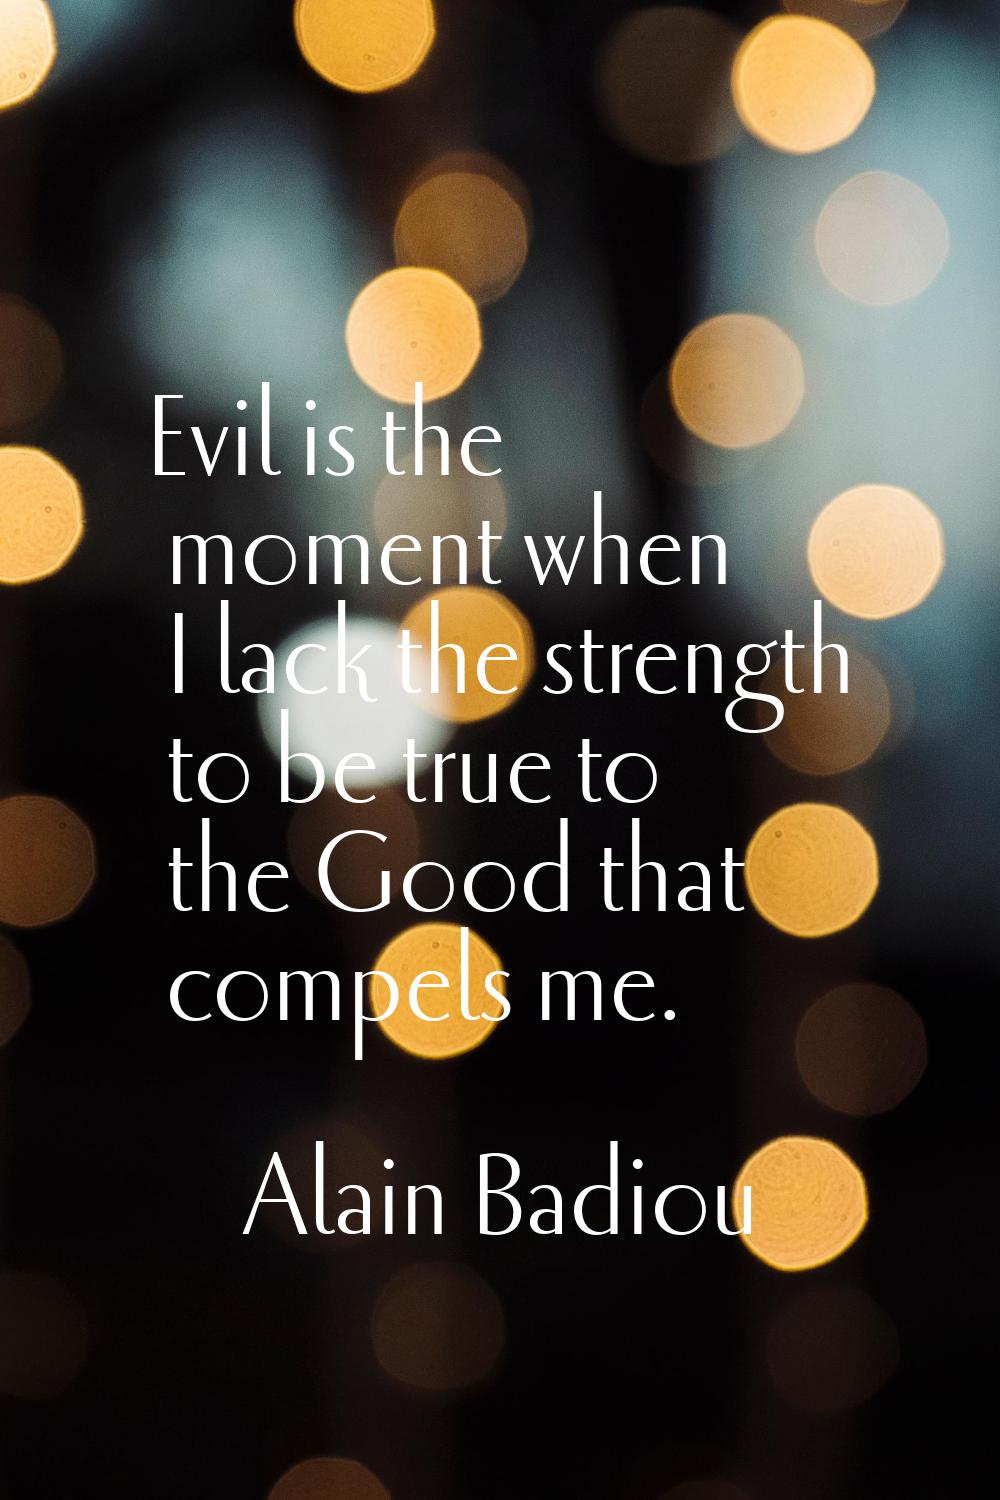 Evil is the moment when I lack the strength to be true to the Good that compels me.